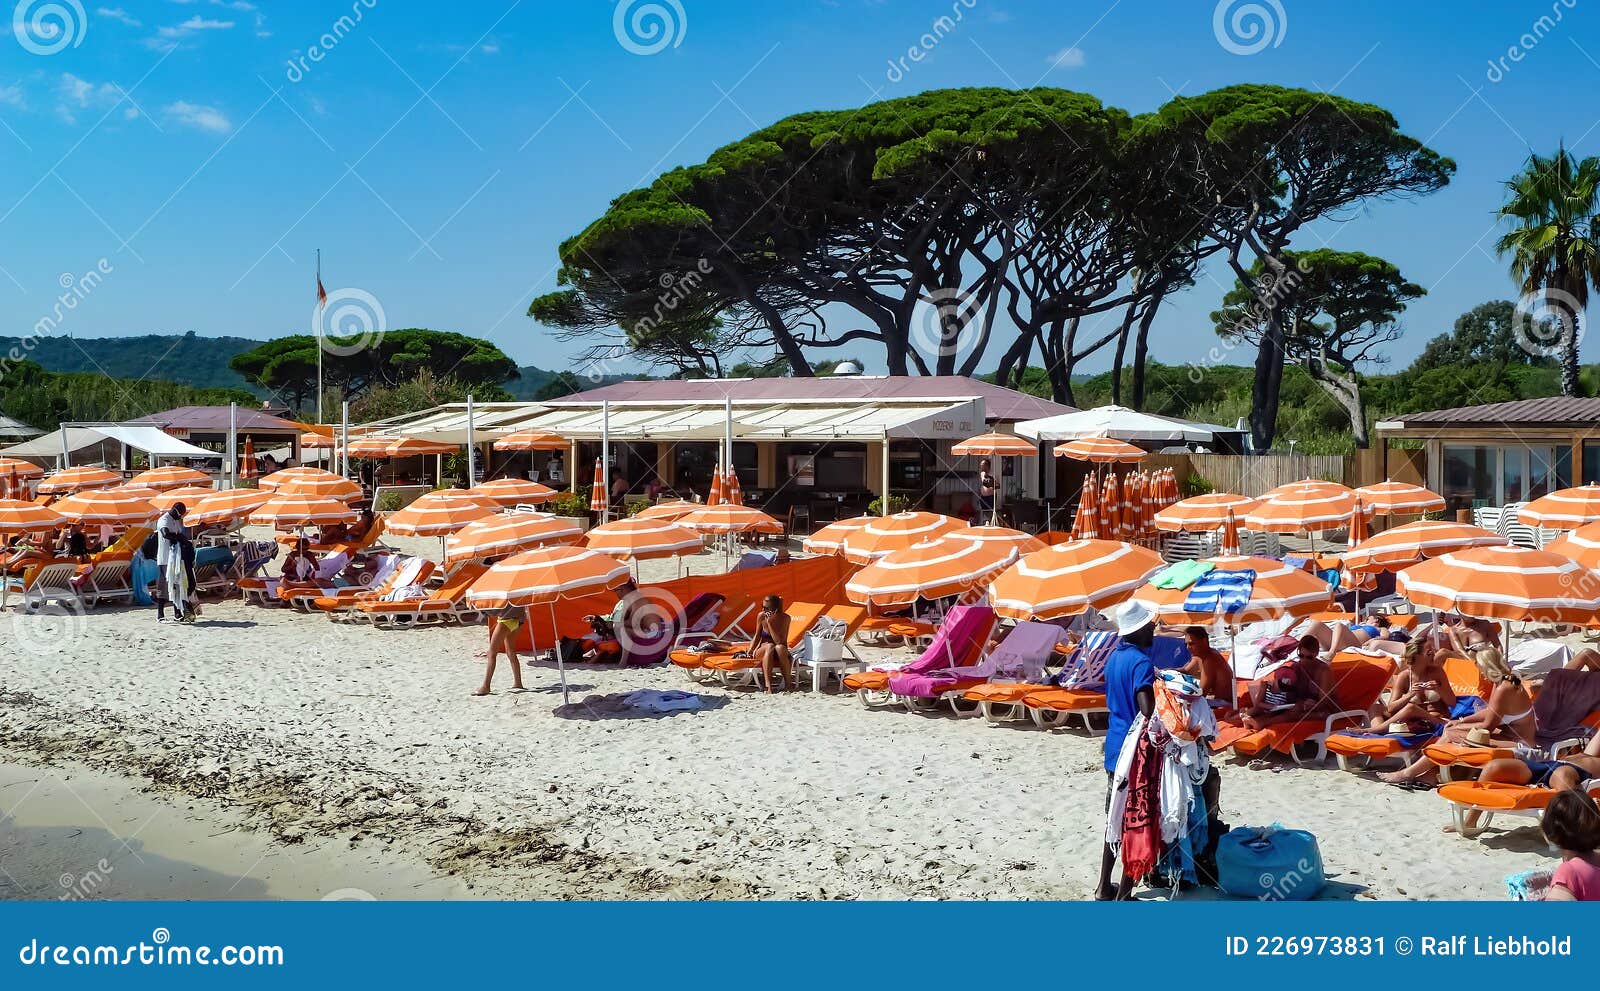 View On Crowded Sand Beach With Many Umbrellas And Sunbeds Mediterranean Pine Trees Background Against Blue Summer Sky Editorial Photo Image Of Blue June